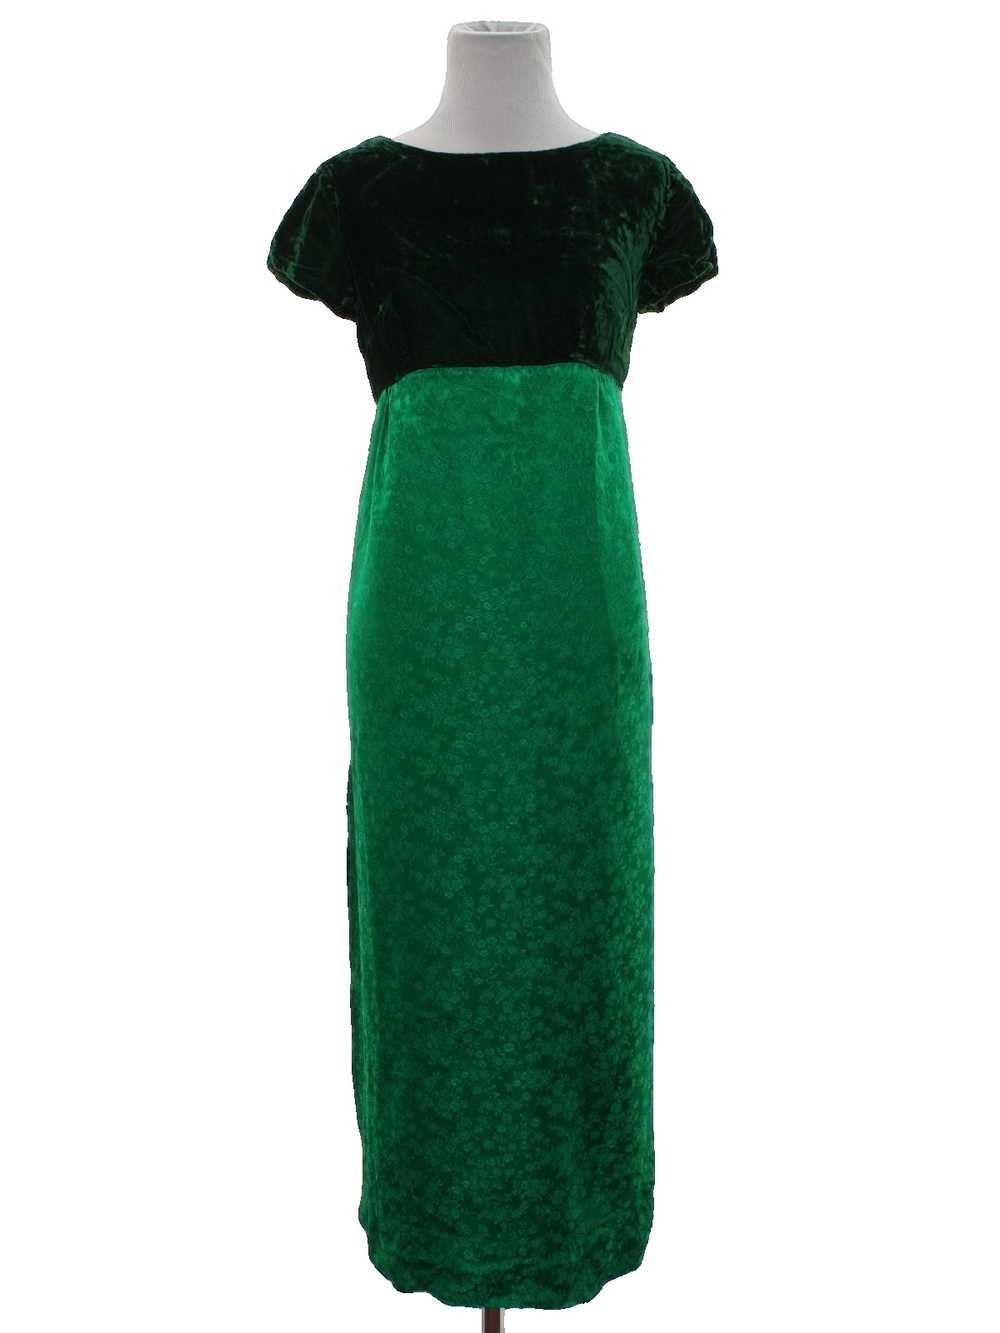 1960's Prom Or Cocktail Maxi Dress - image 1